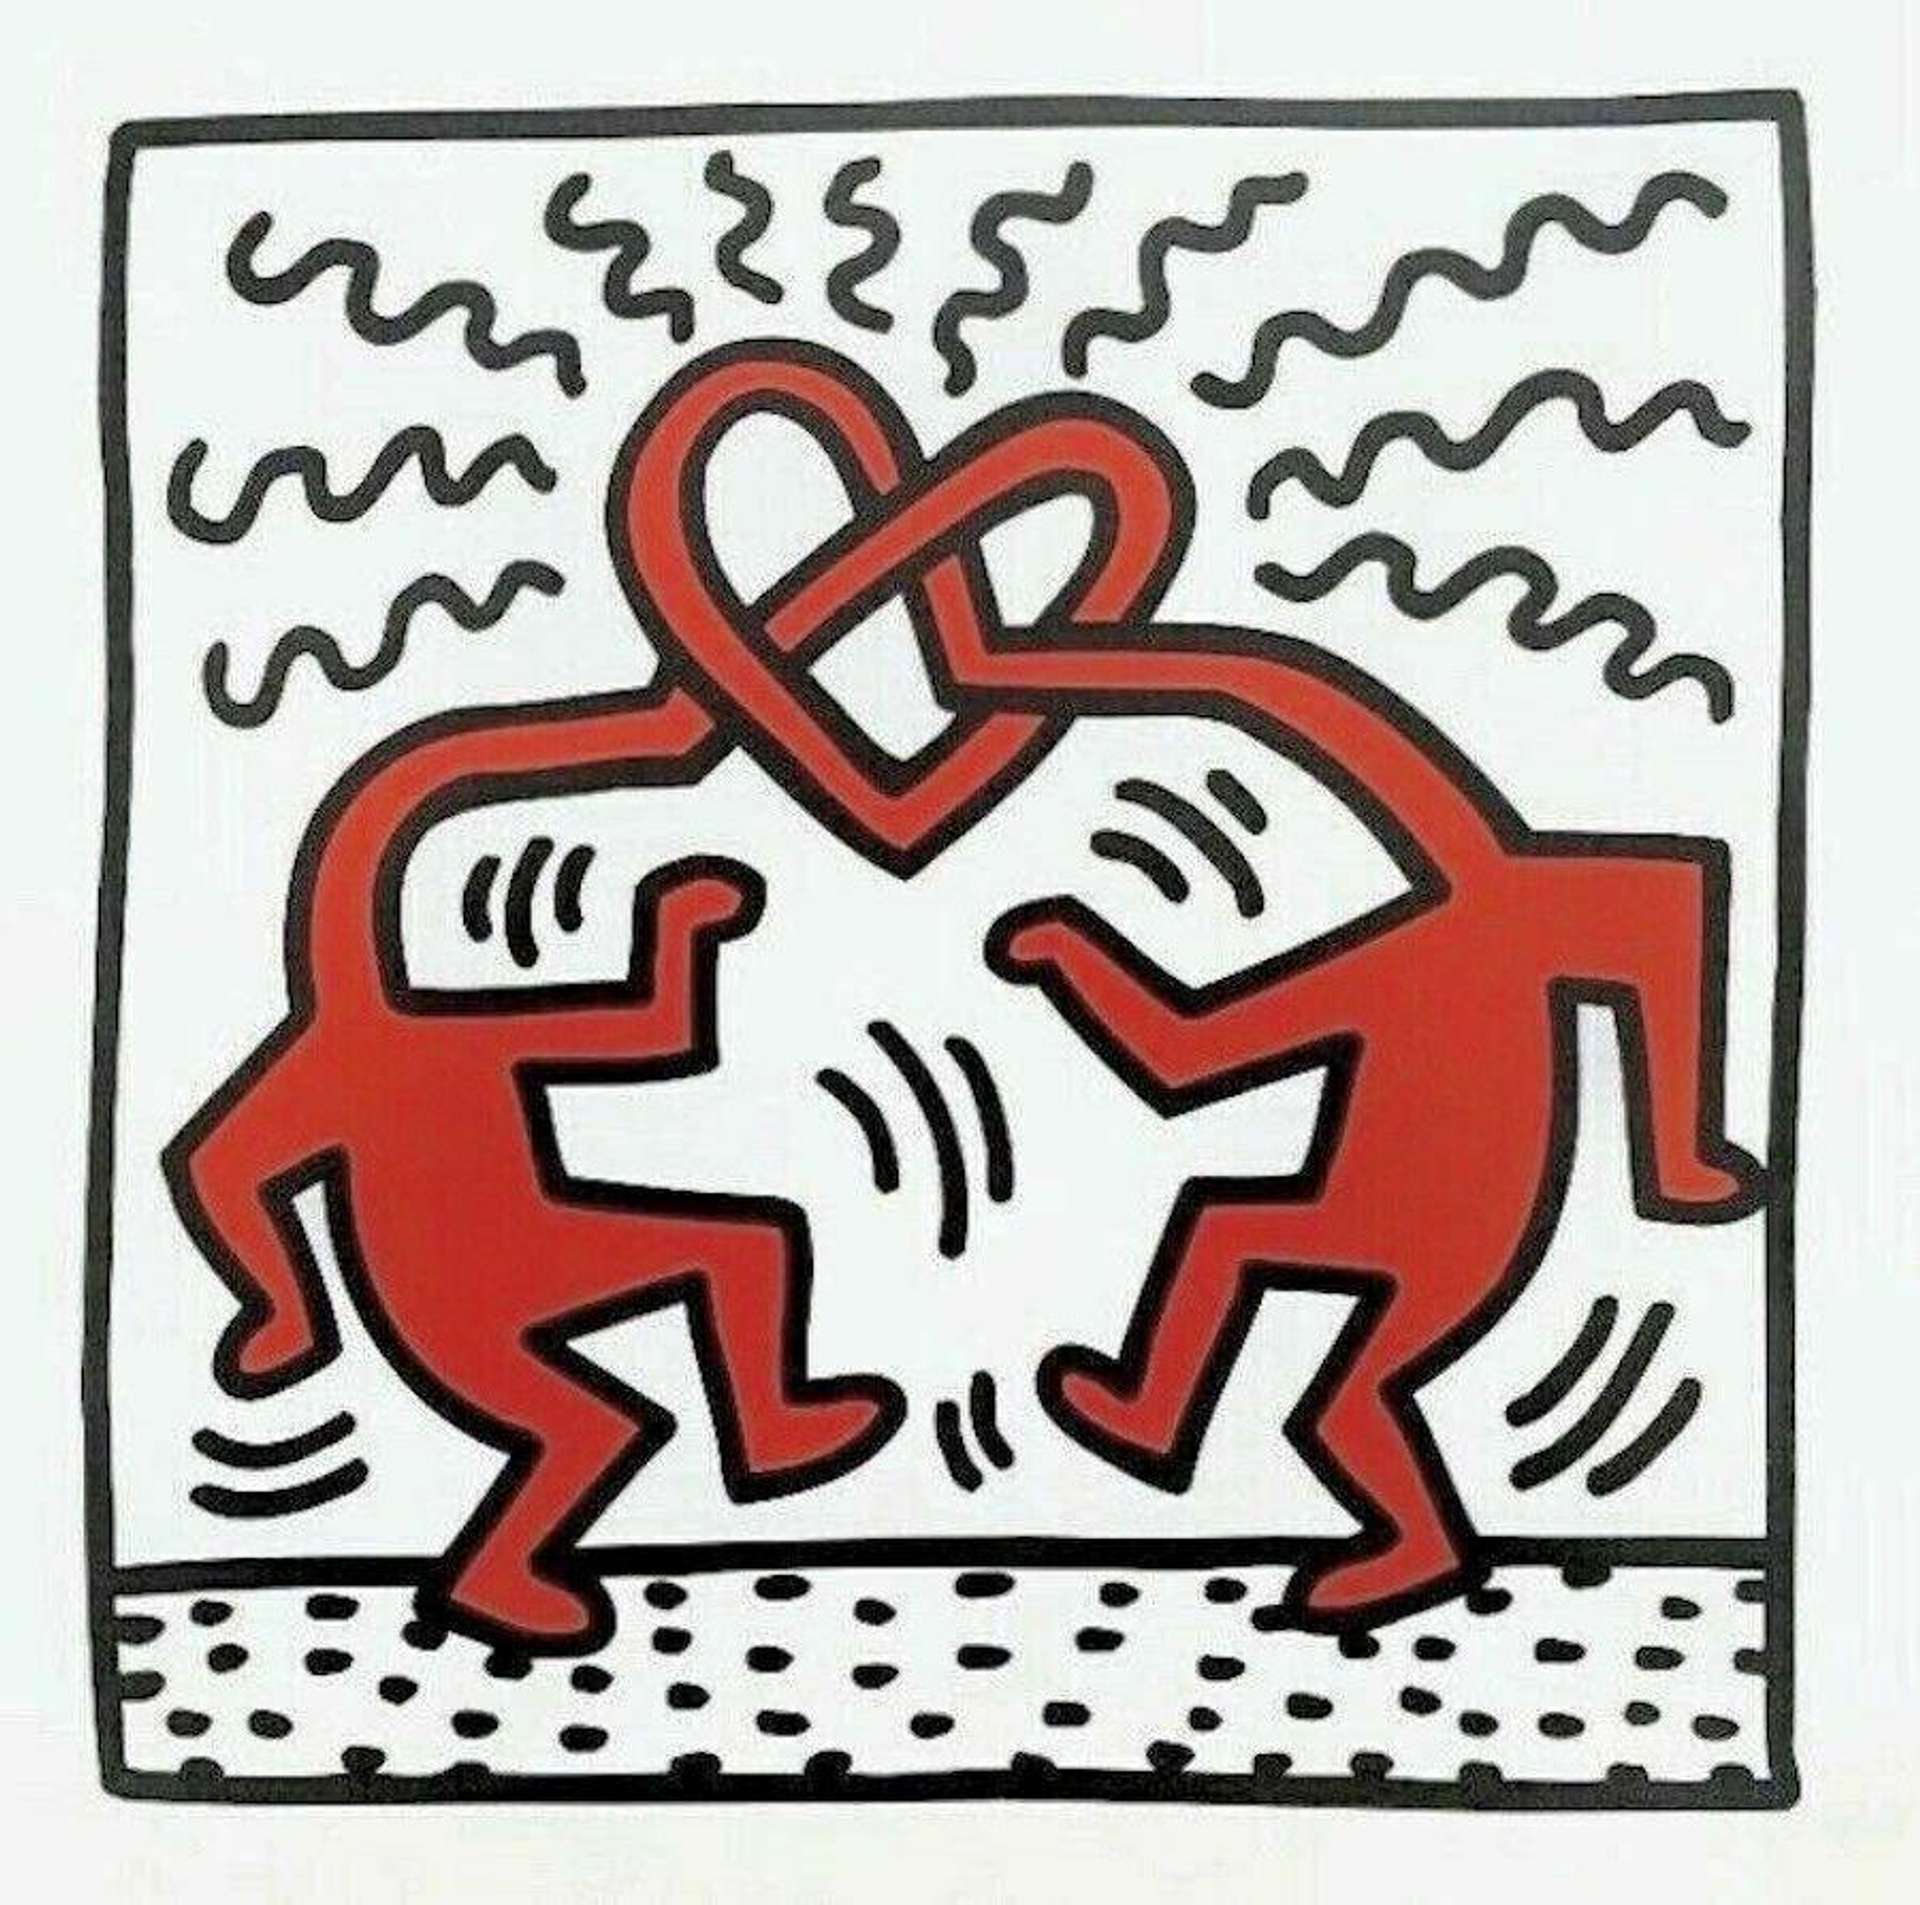 Untitled 1989 - Signed Print by Keith Haring 1989 - MyArtBroker